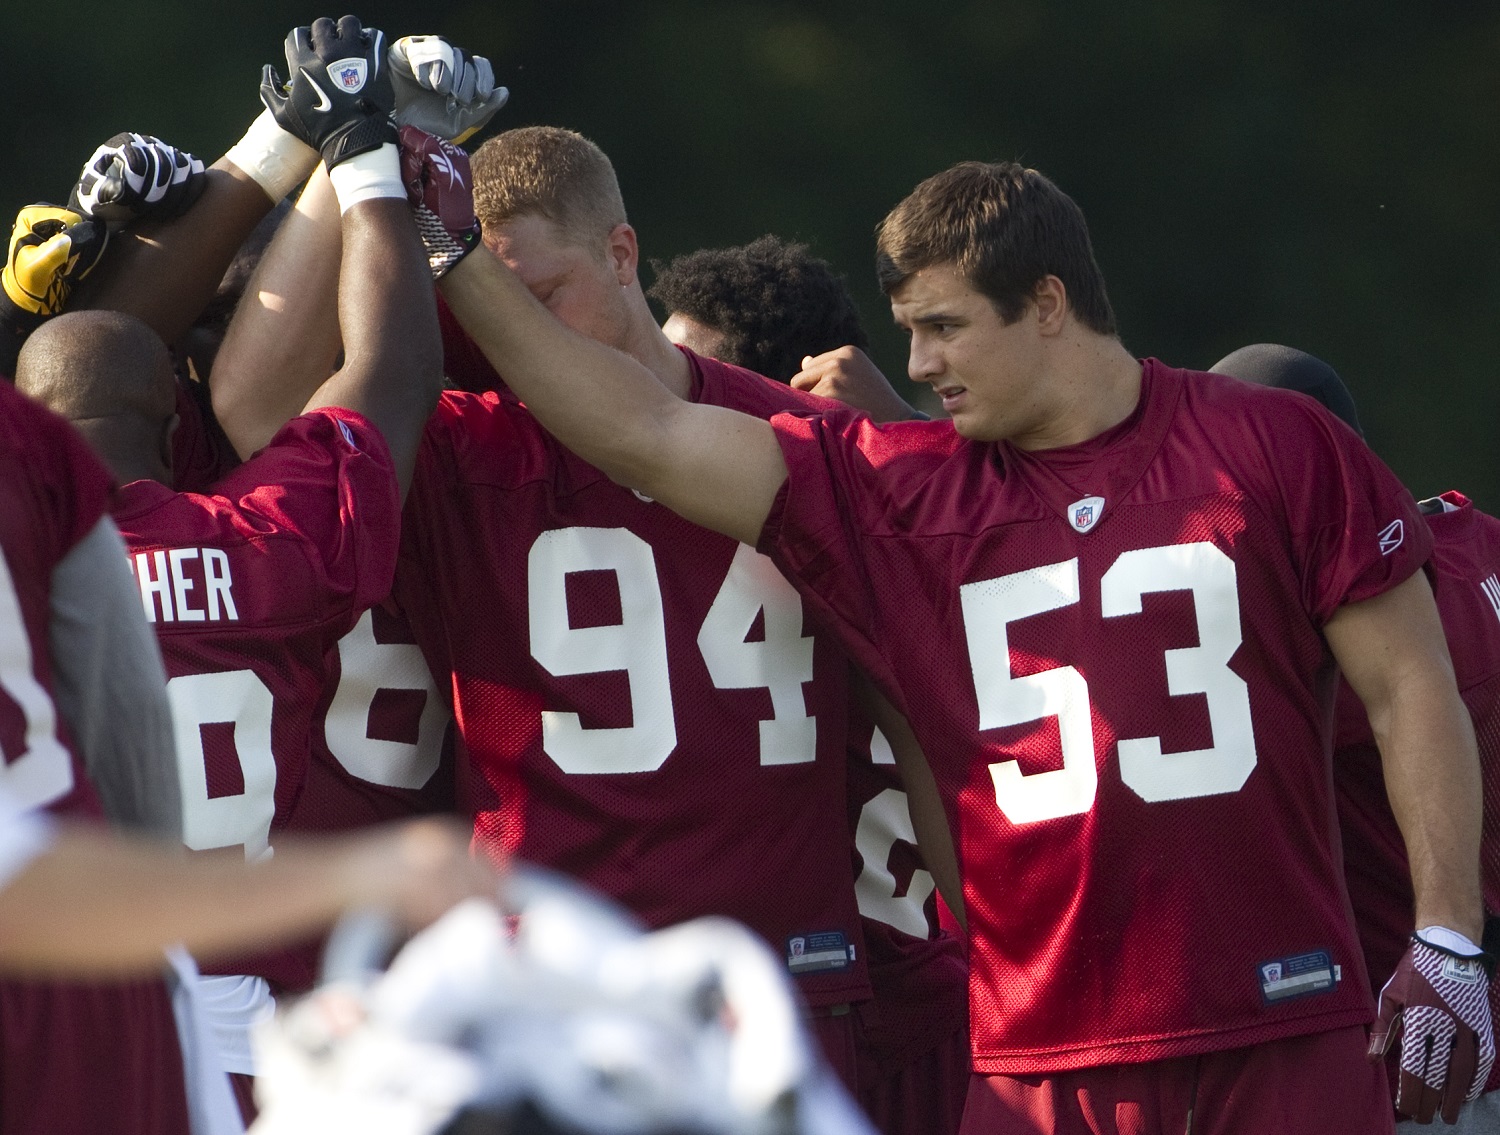 Washington Redskins first round draft pick Ryan Kerrigan (53) gets in a huddle during the NFL football team's training camp practice on Friday, July 29, 2011, in Ashburn, Va.  (AP Photo/Evan Vucci)